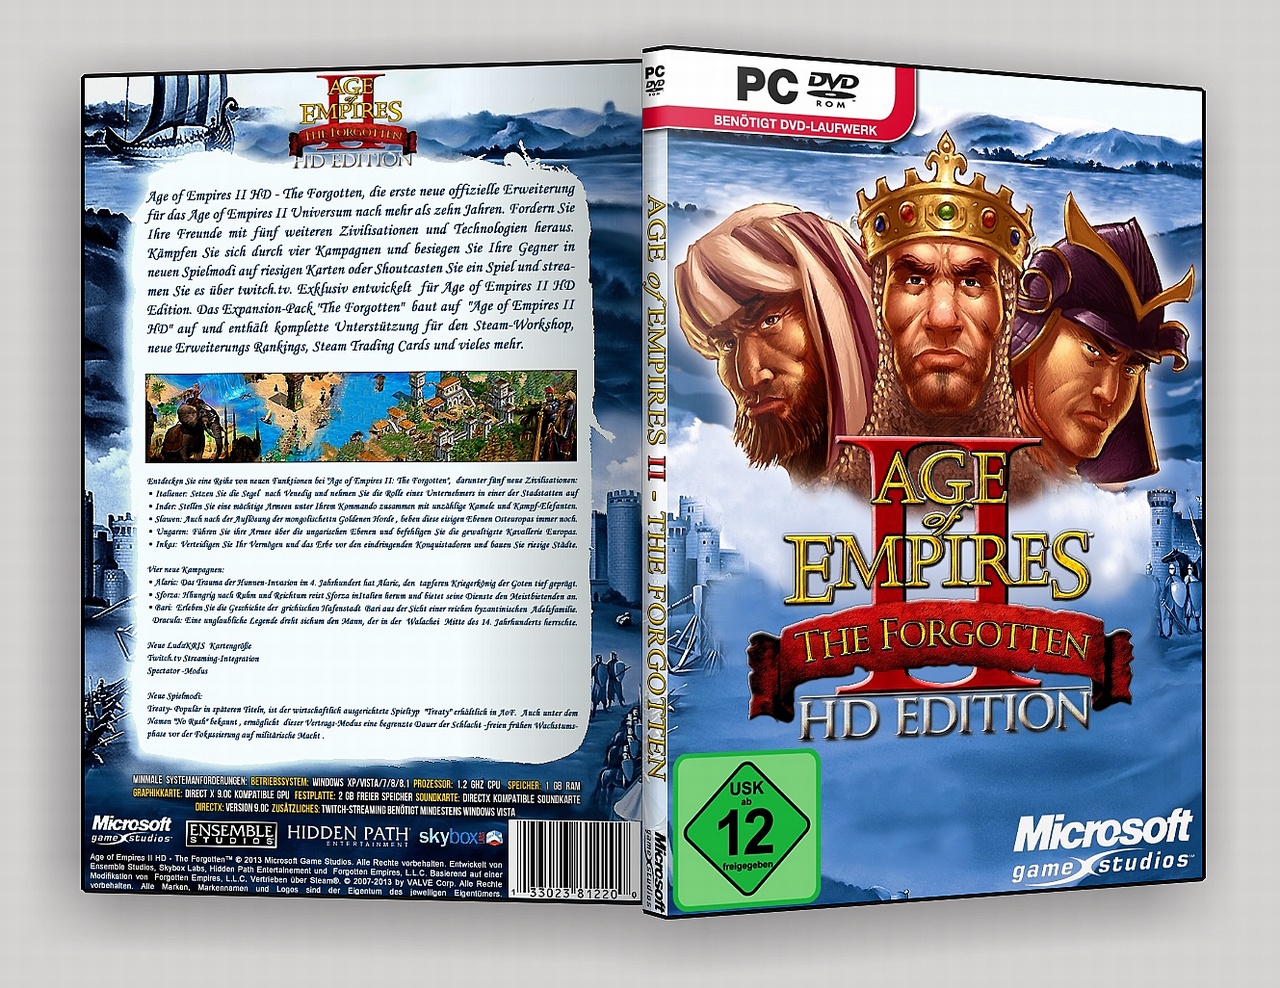 Age of Empires 2 HD: The Forgotten box cover